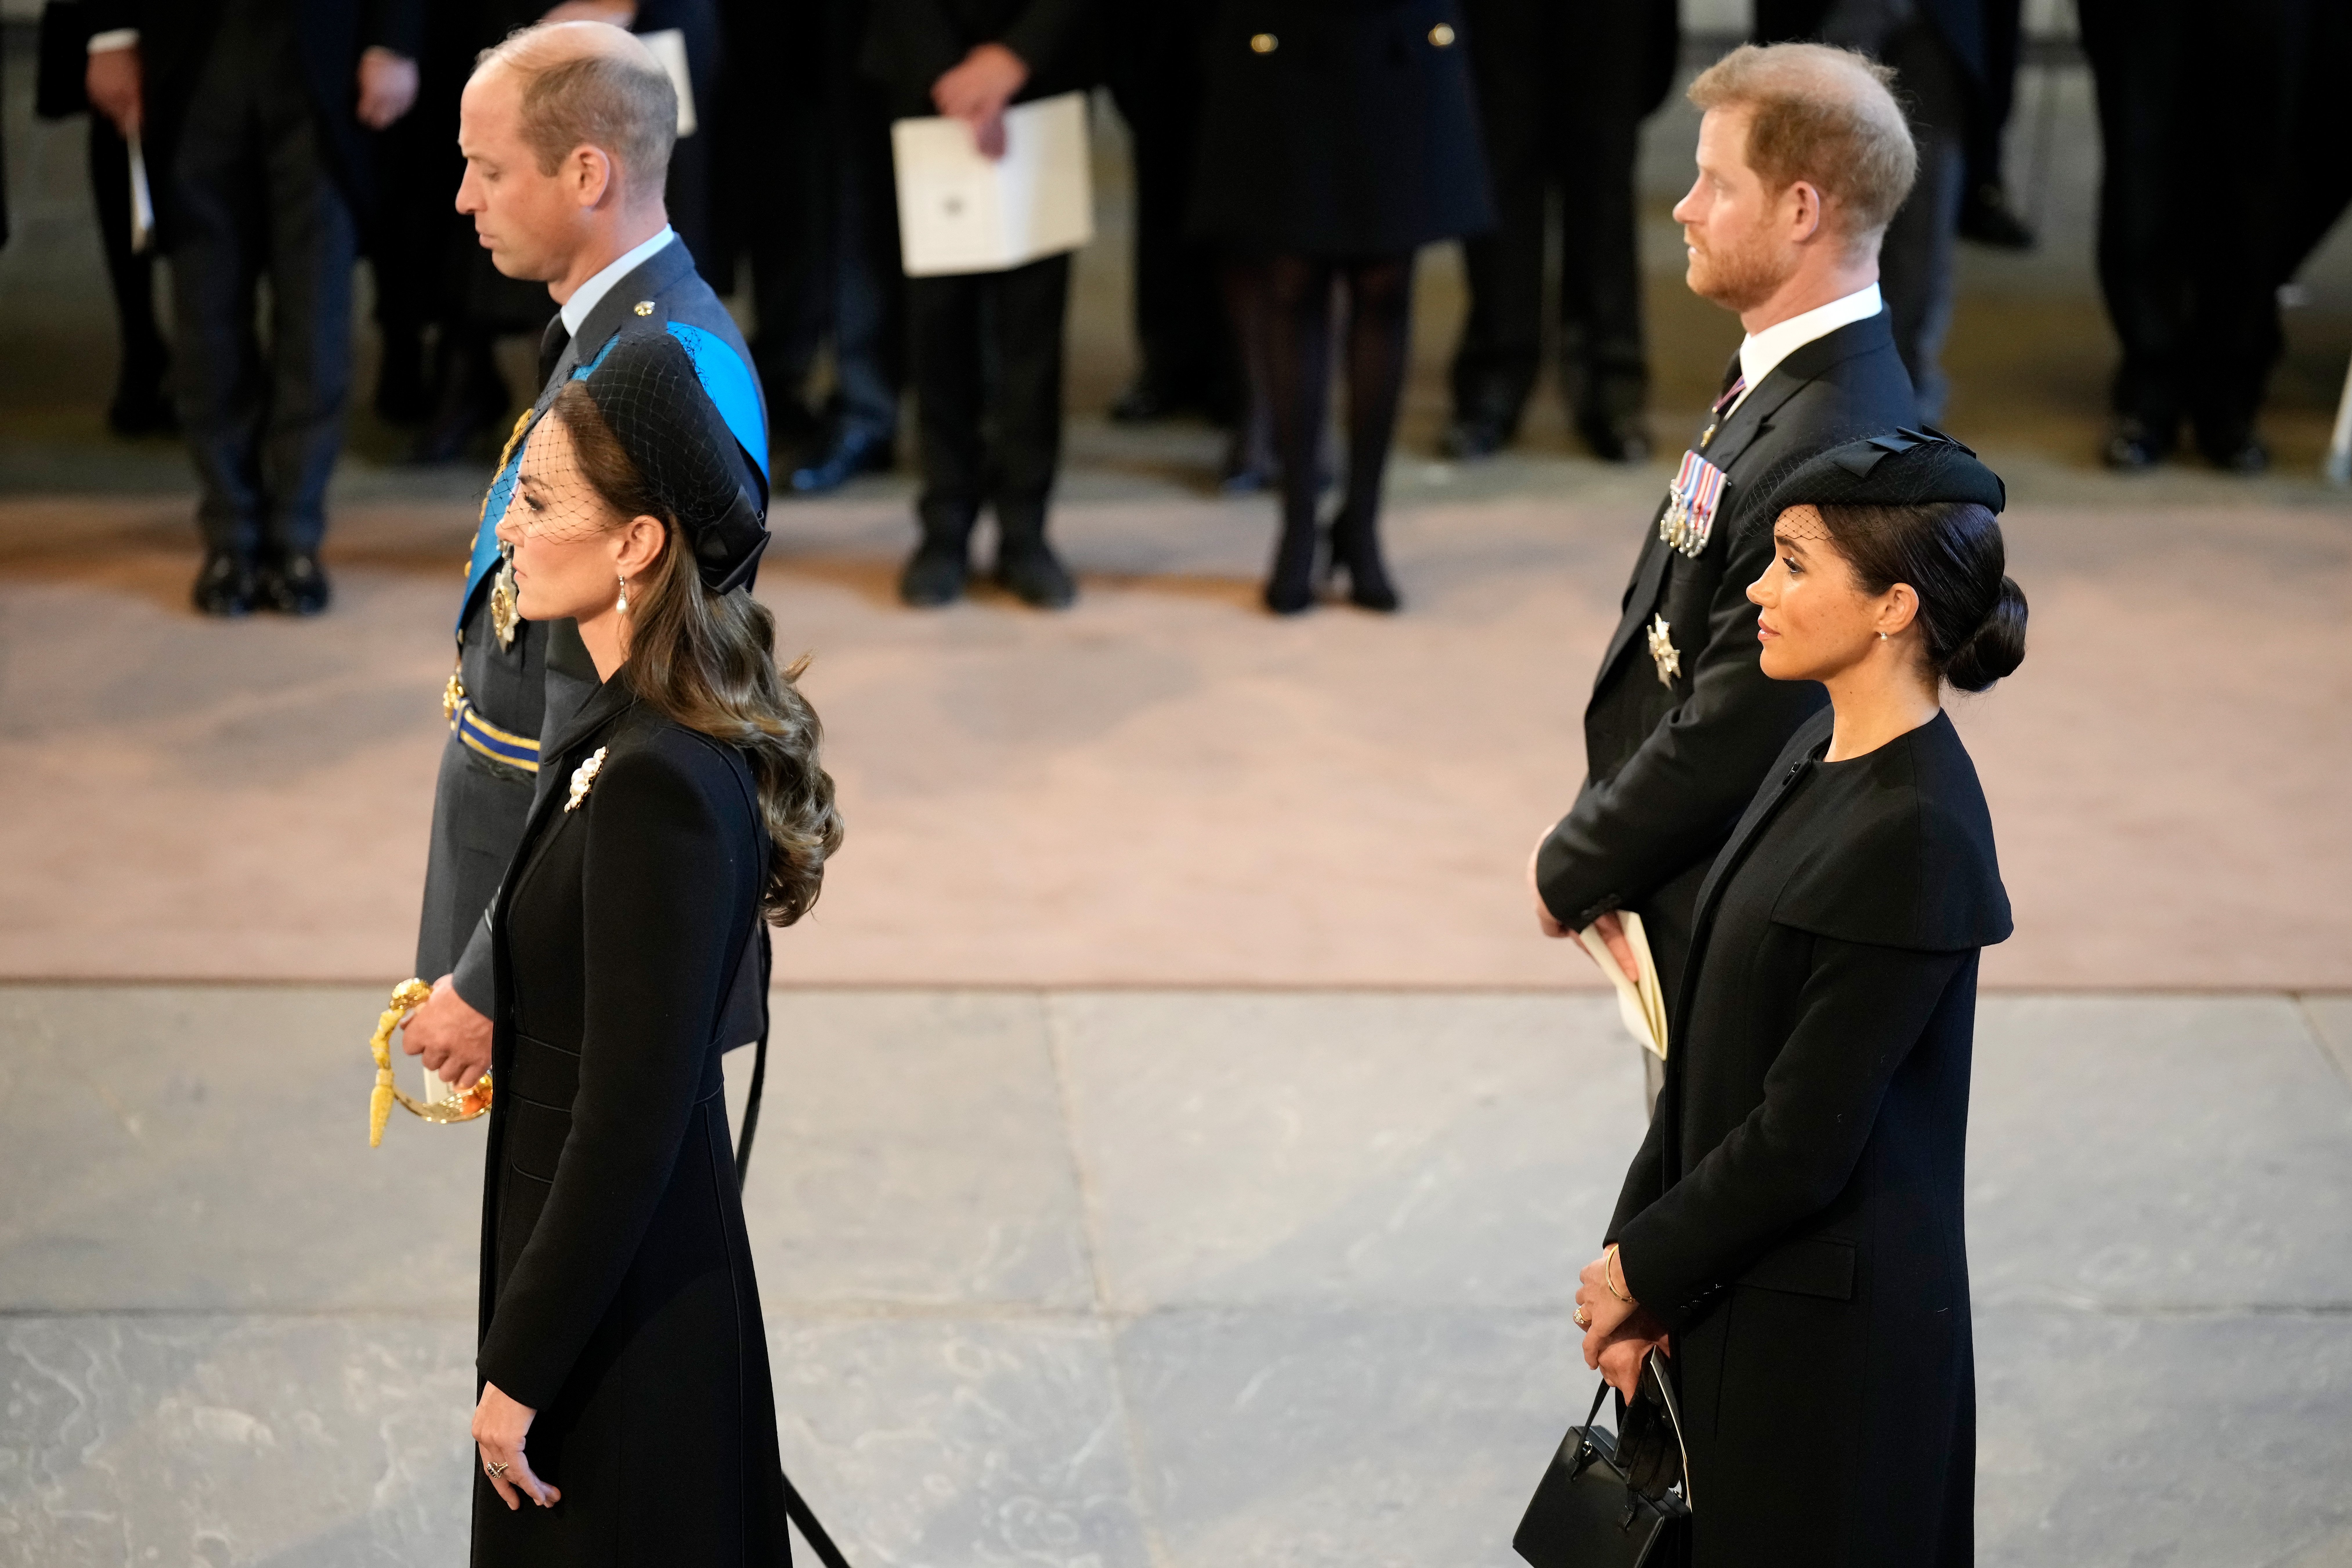 Catherine, Princess of Wales, Prince William, Prince of Wales, Meghan, Duchess of Sussex and Prince Harry, Duke of Sussex pay their respects in The Palace of Westminster after the procession for the Lying-in State of Queen Elizabeth II on September 14, 2022 in London, England | Source: Getty Images 